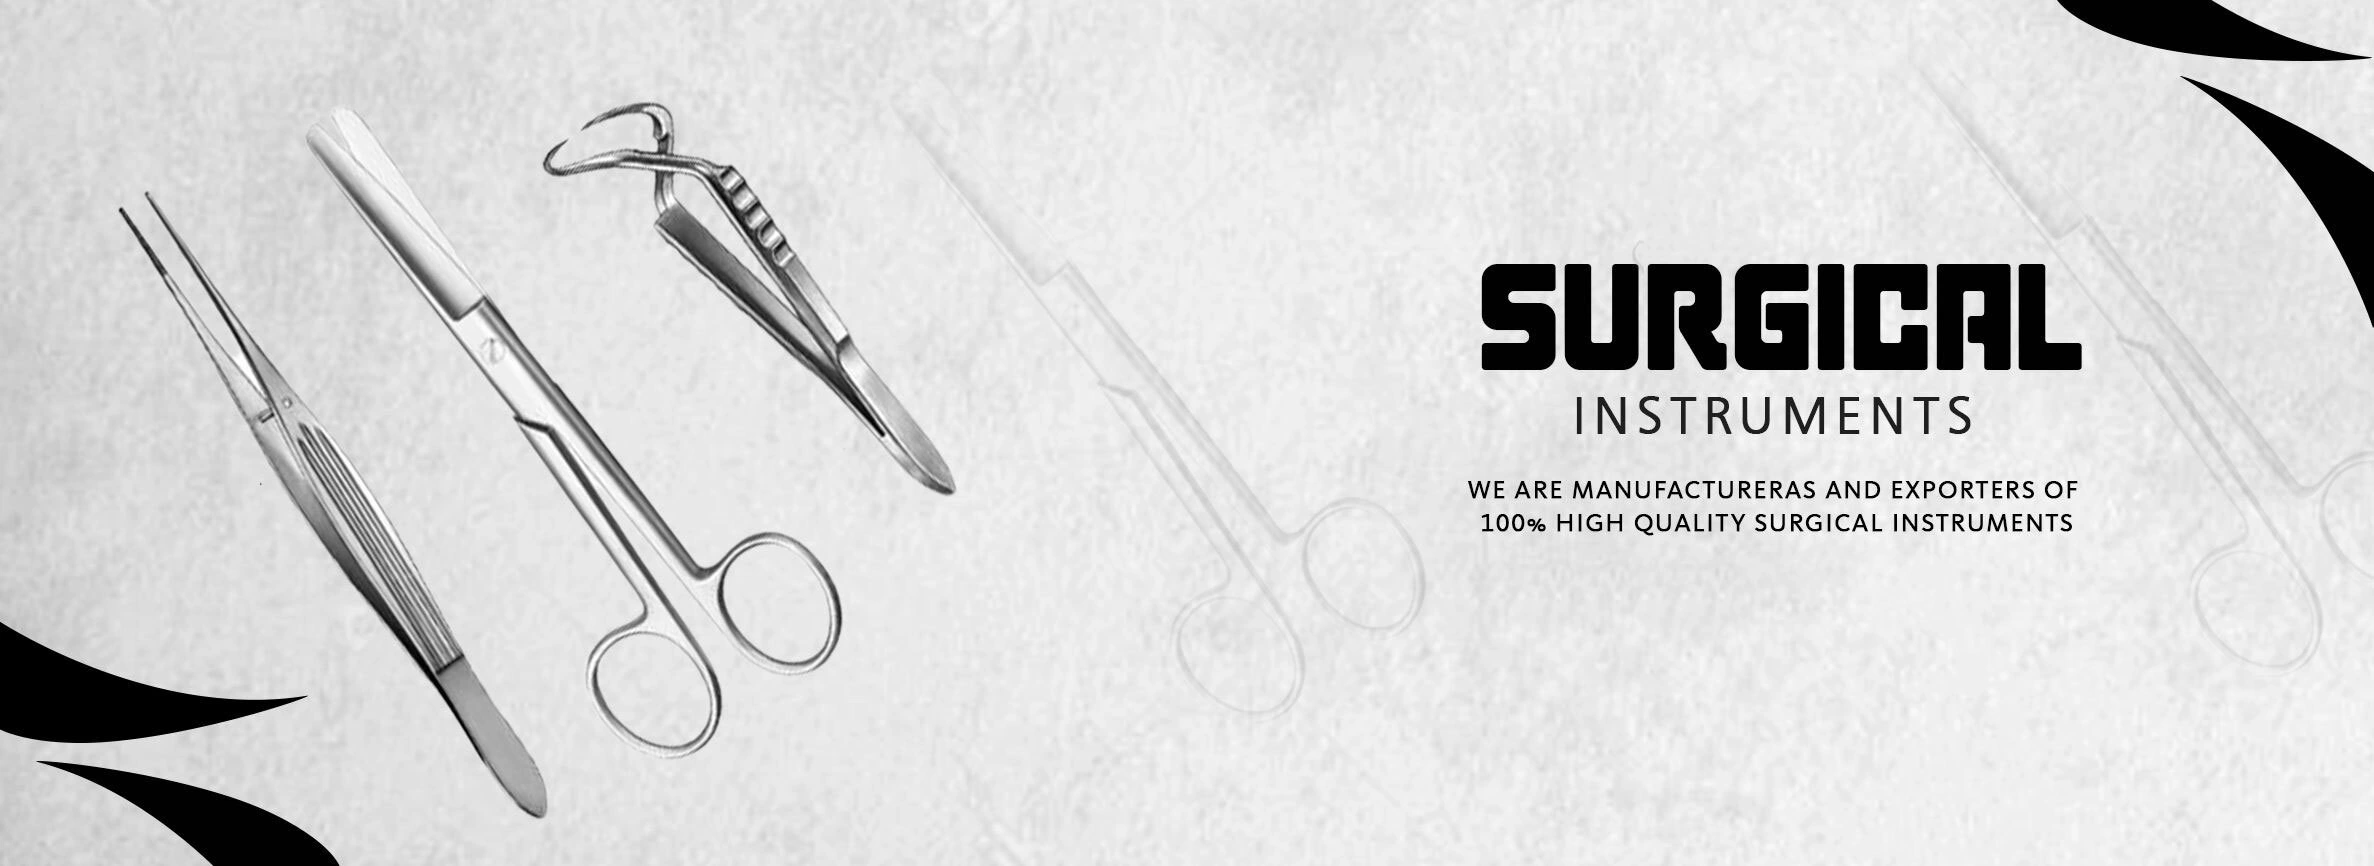 Surgical Instruments Manufacturer and Exporter 100% High Quality